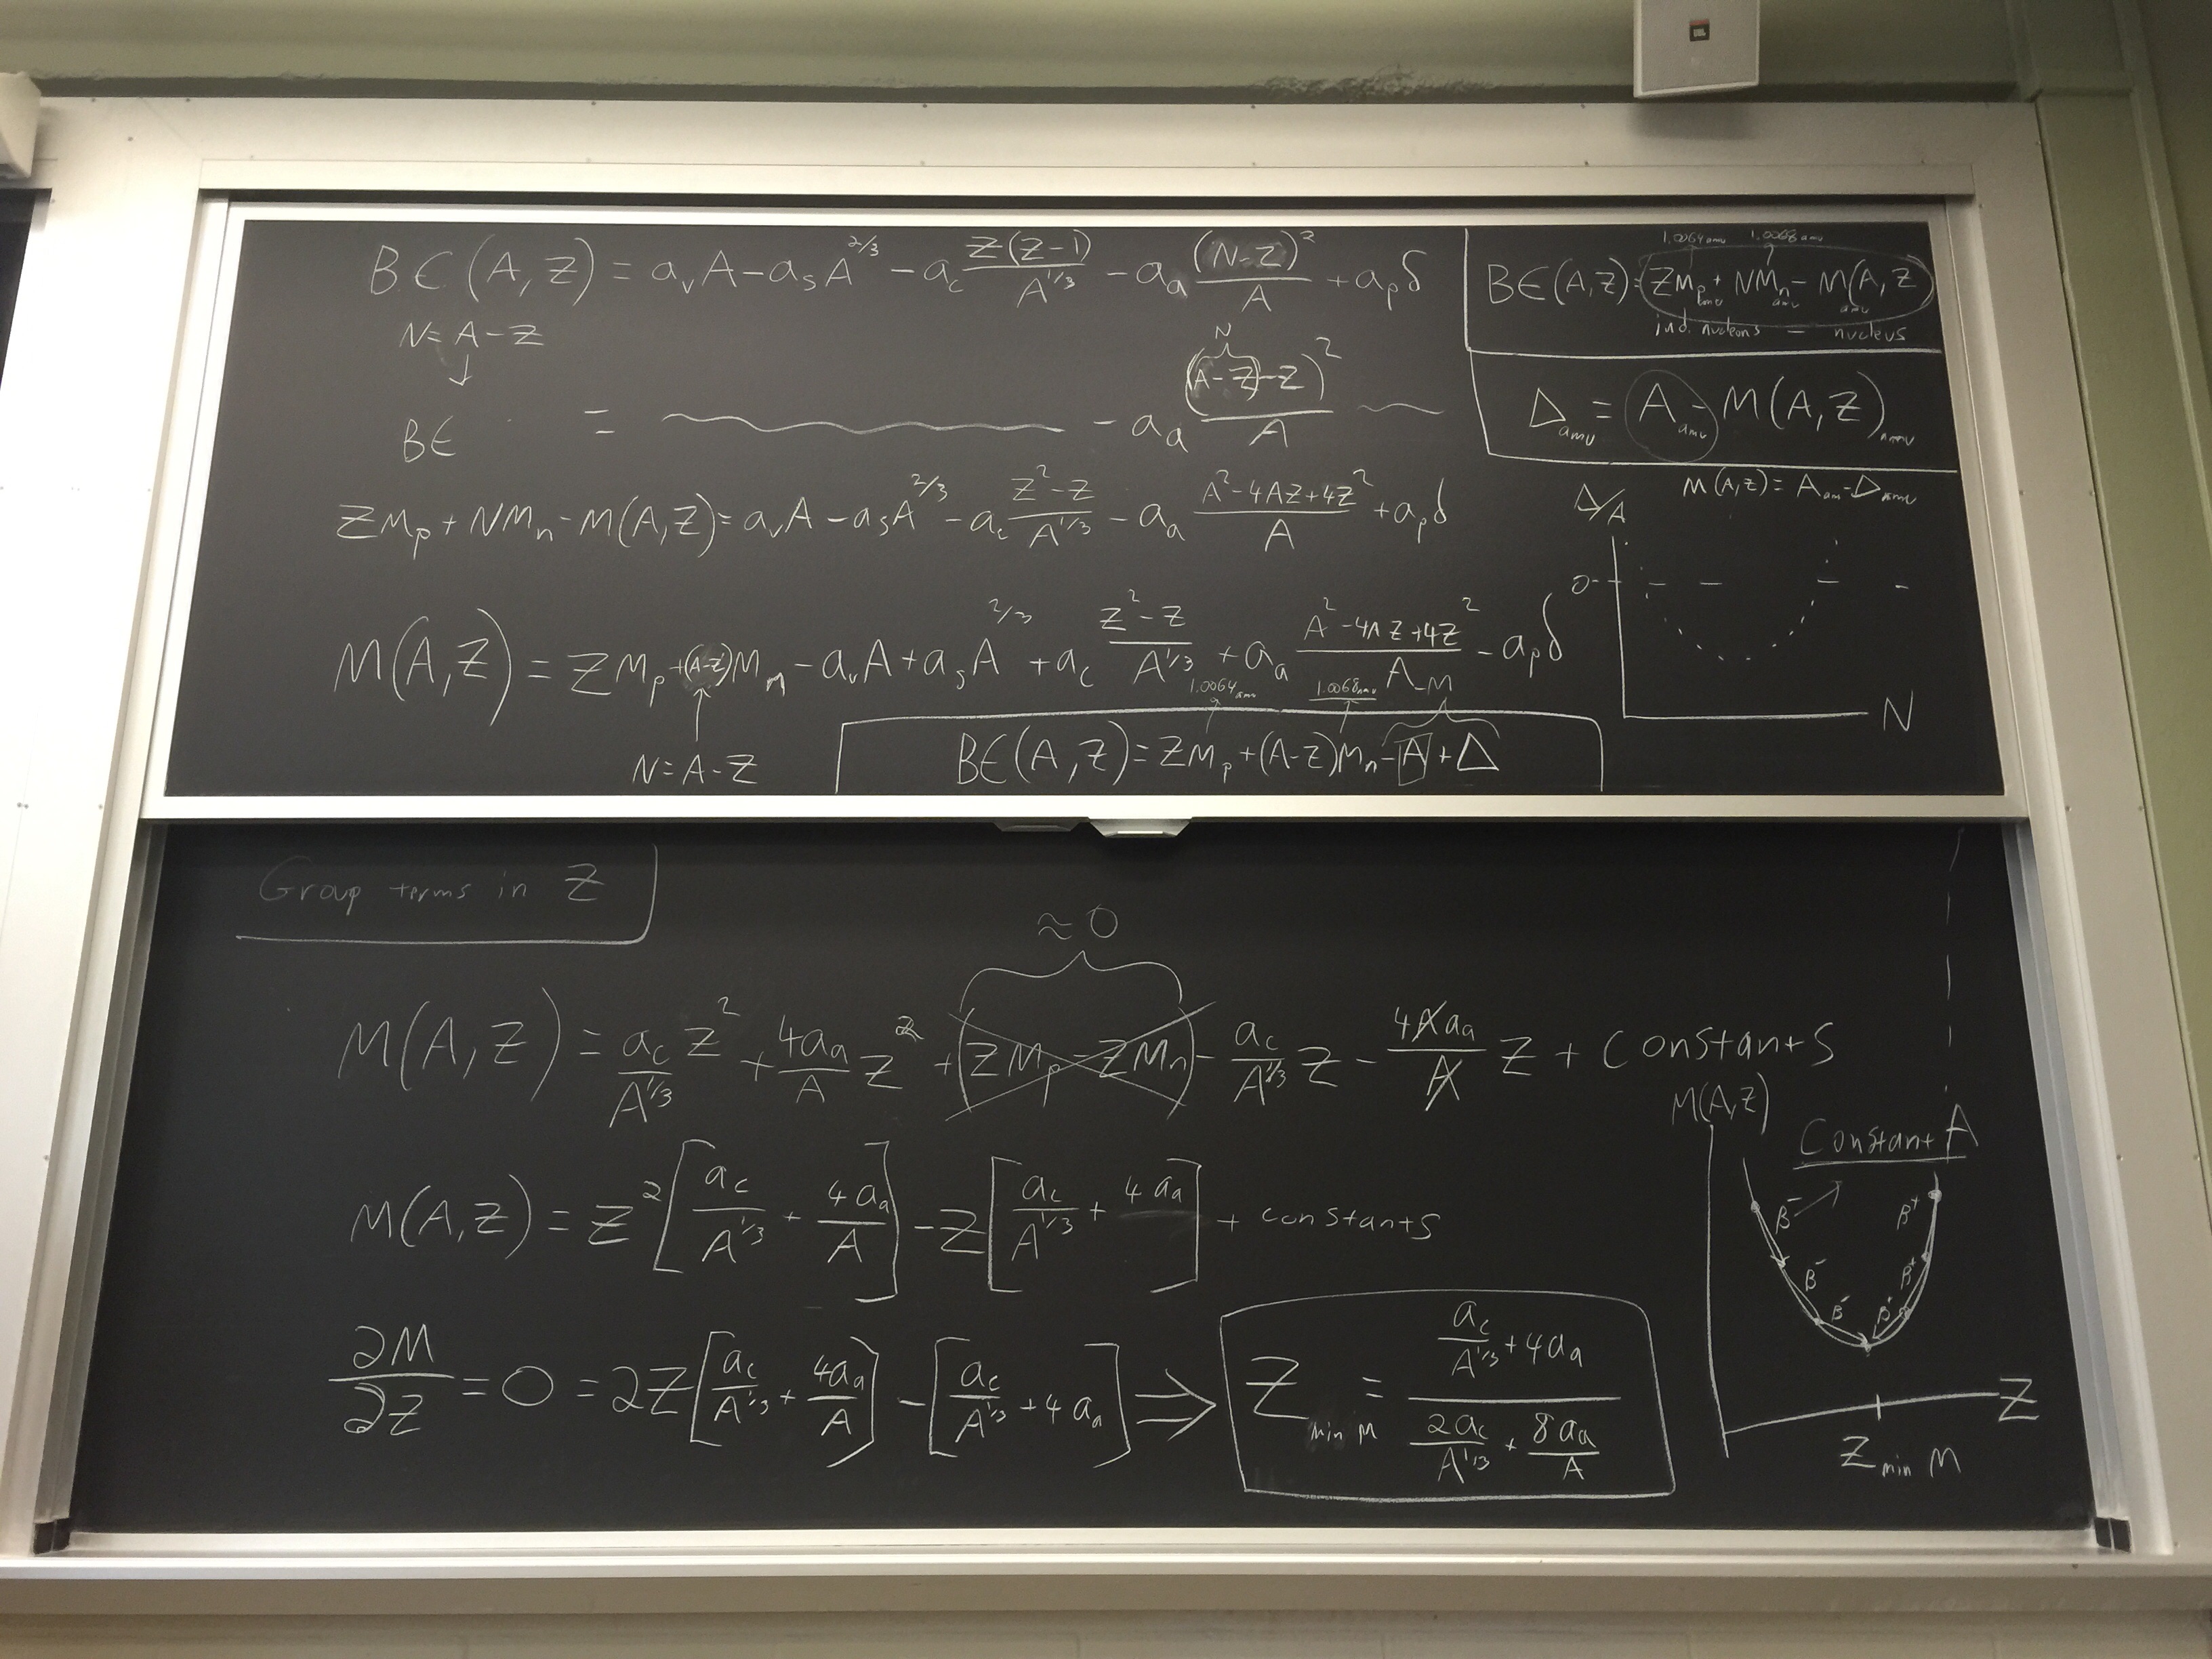 Energy related equations on two blackboards.